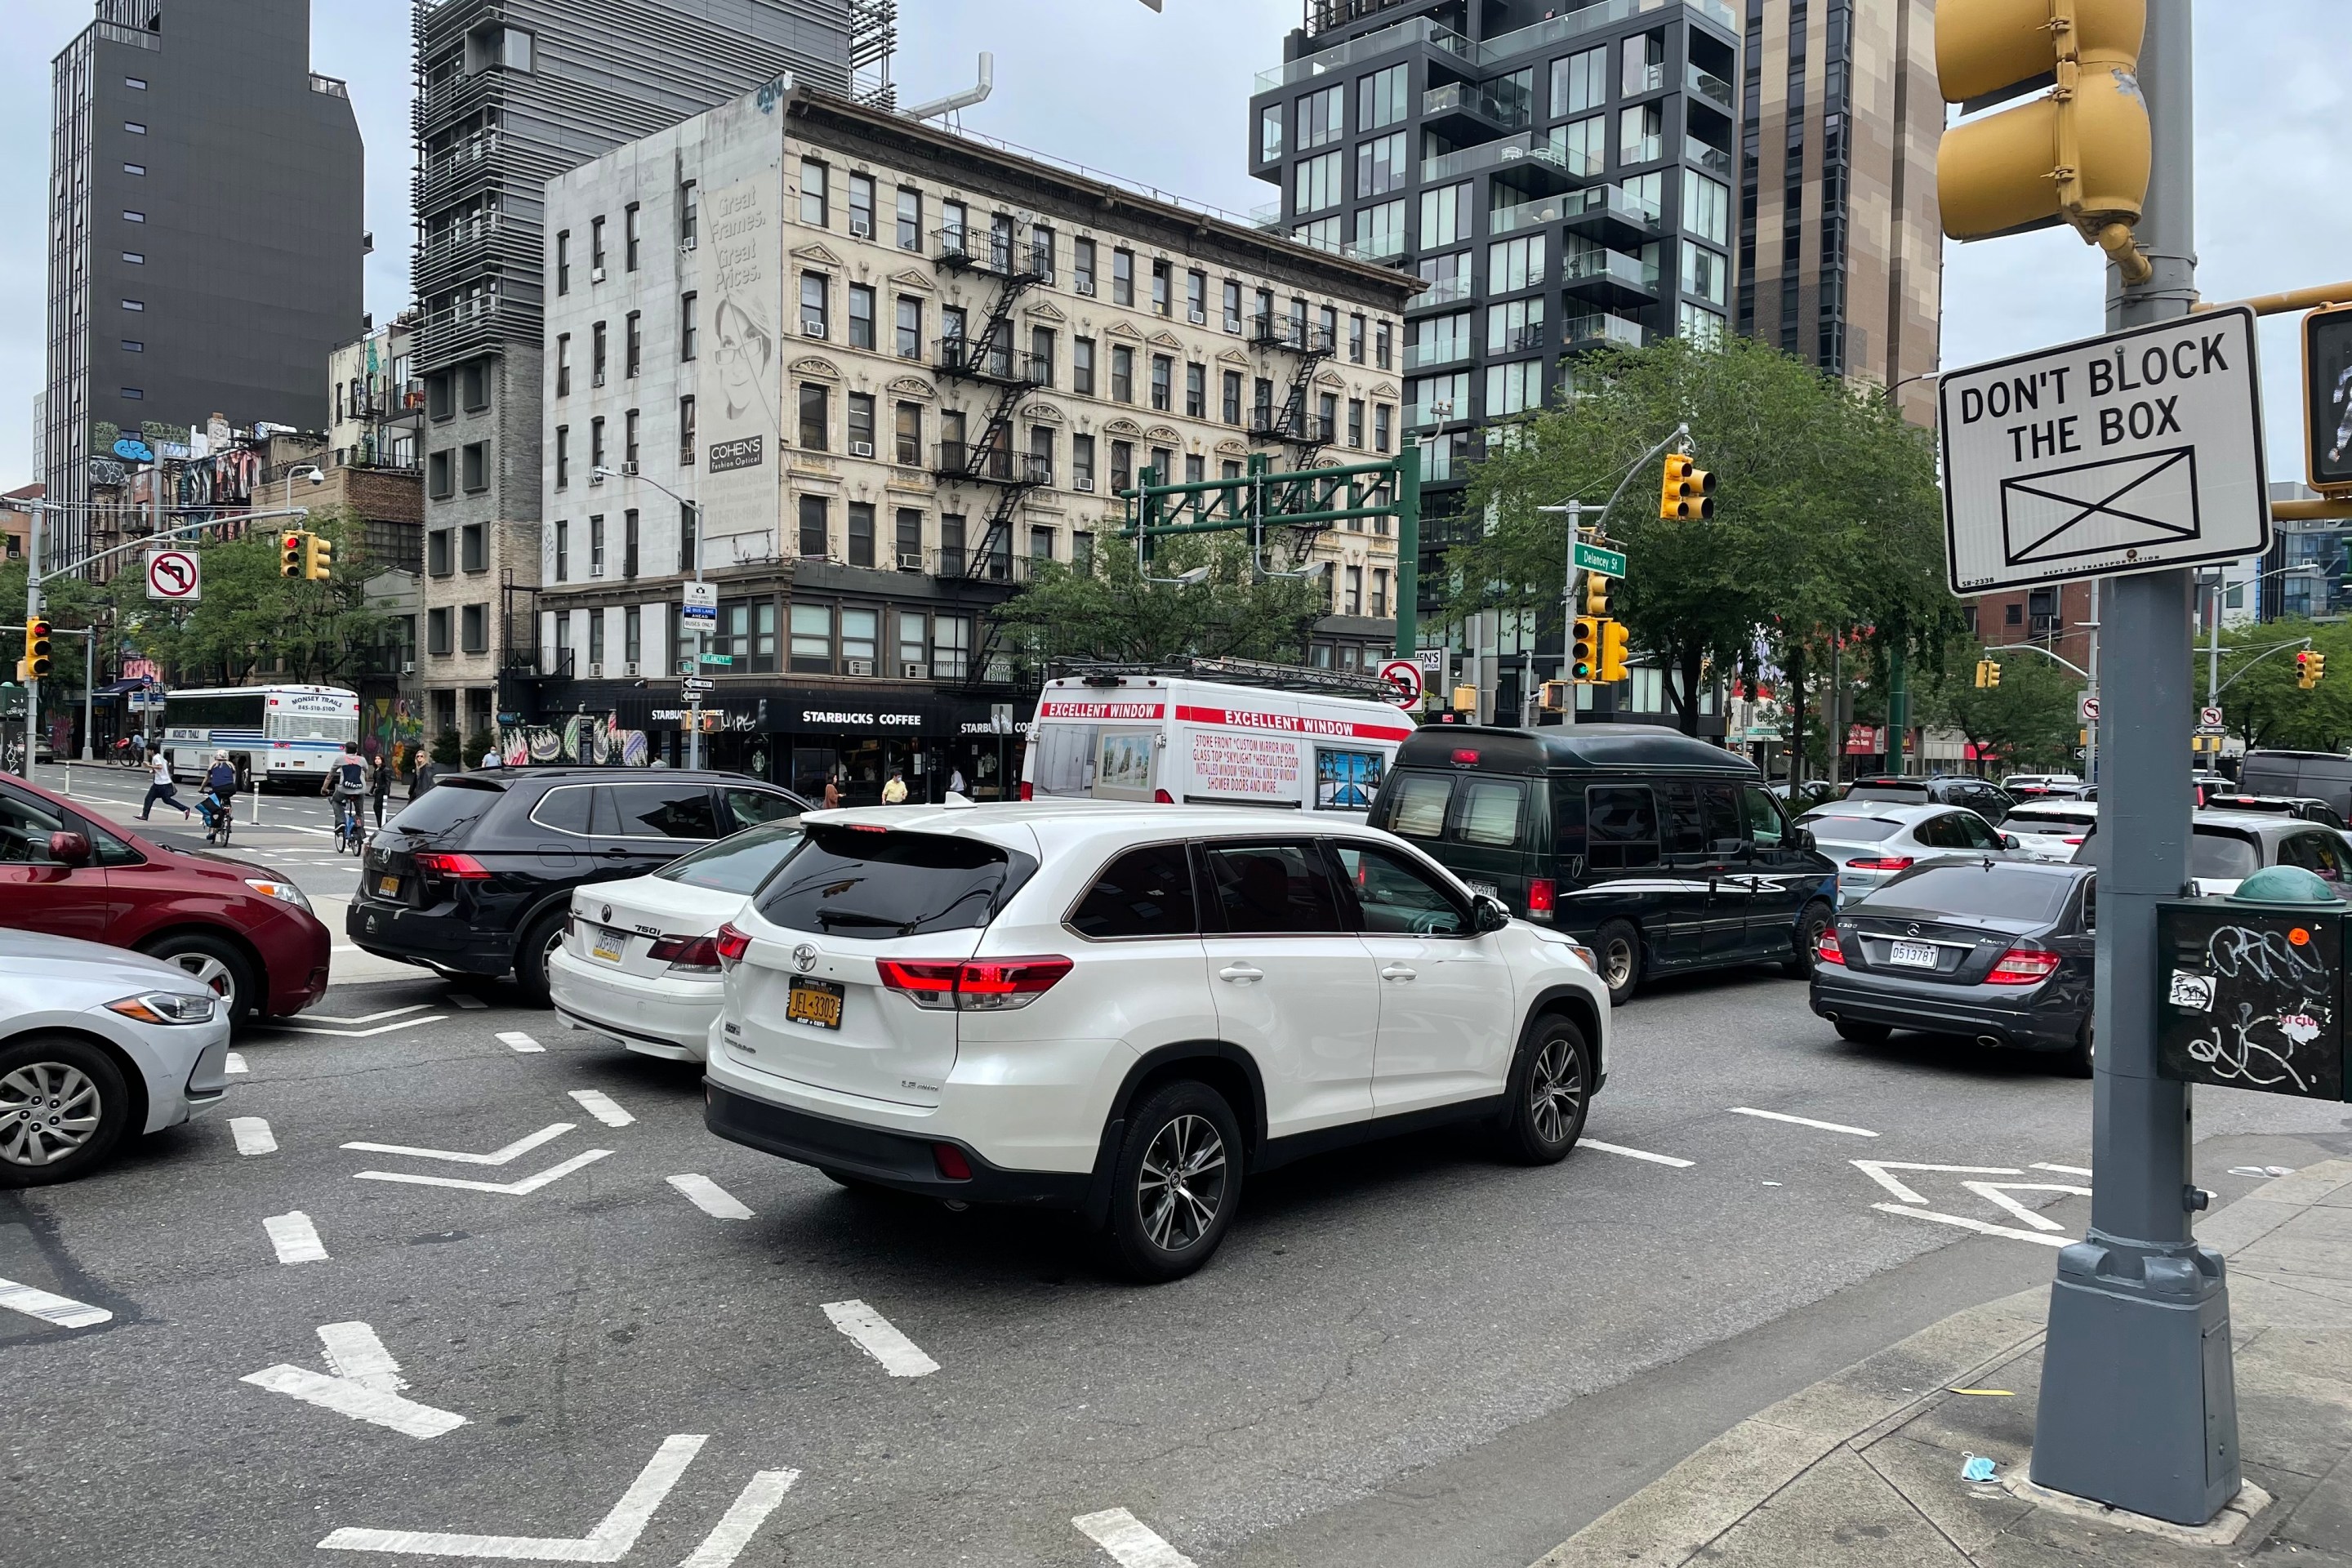 Cars block the intersection in a traffic jam on Delancey Street.